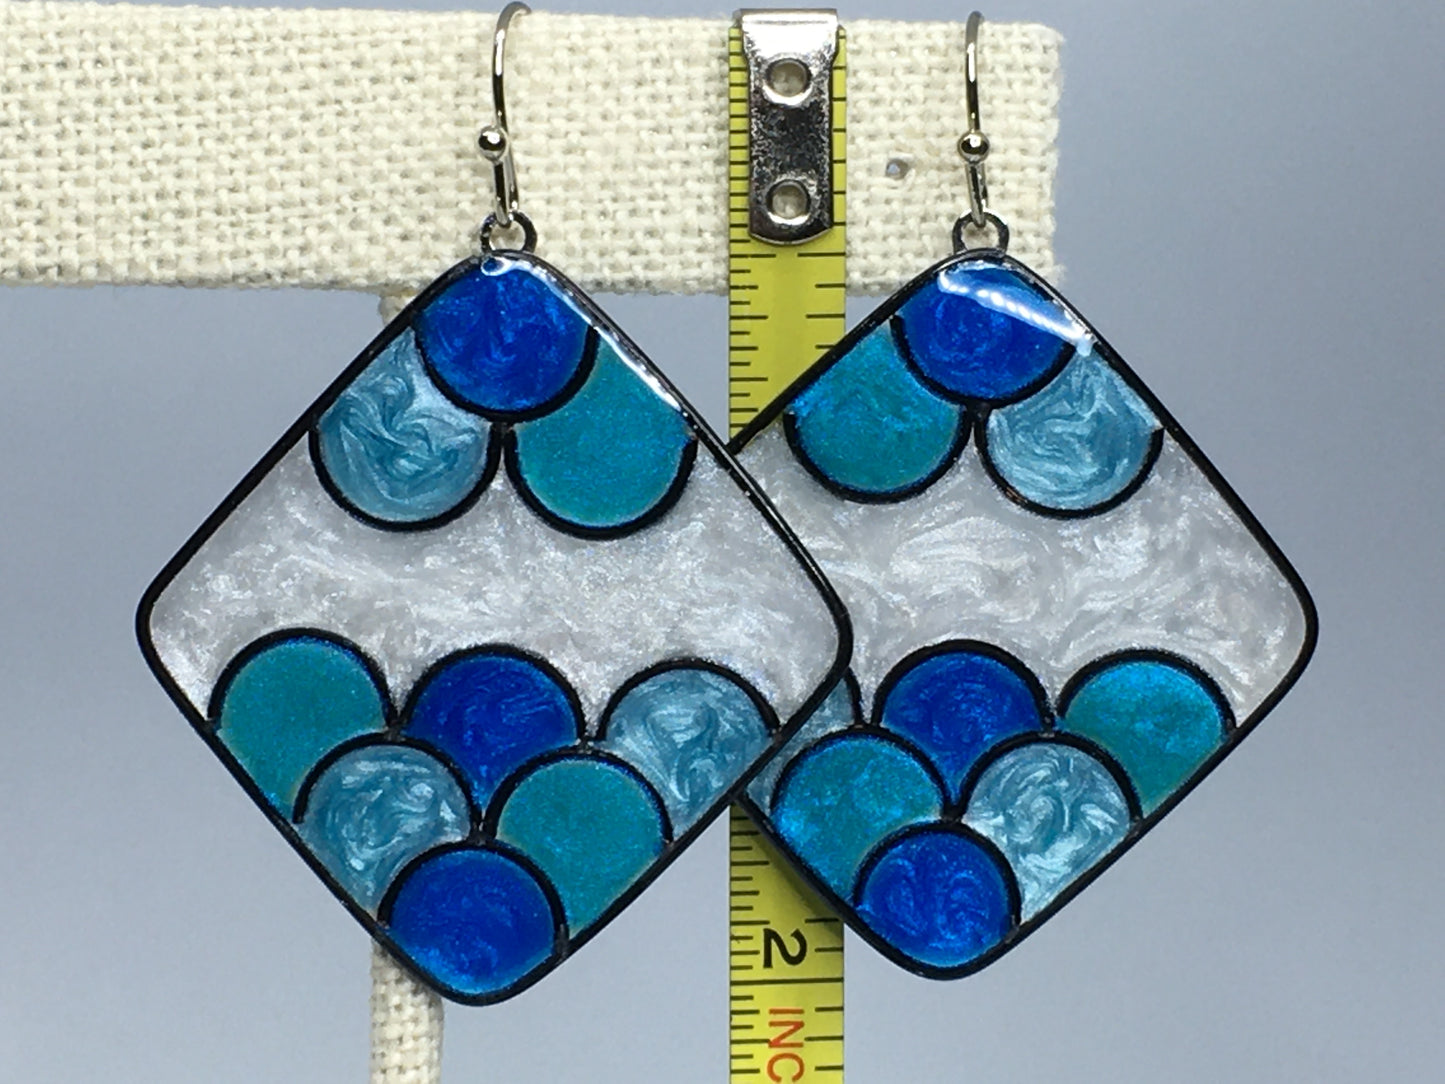 Blue, teal, mint and white resin earrings